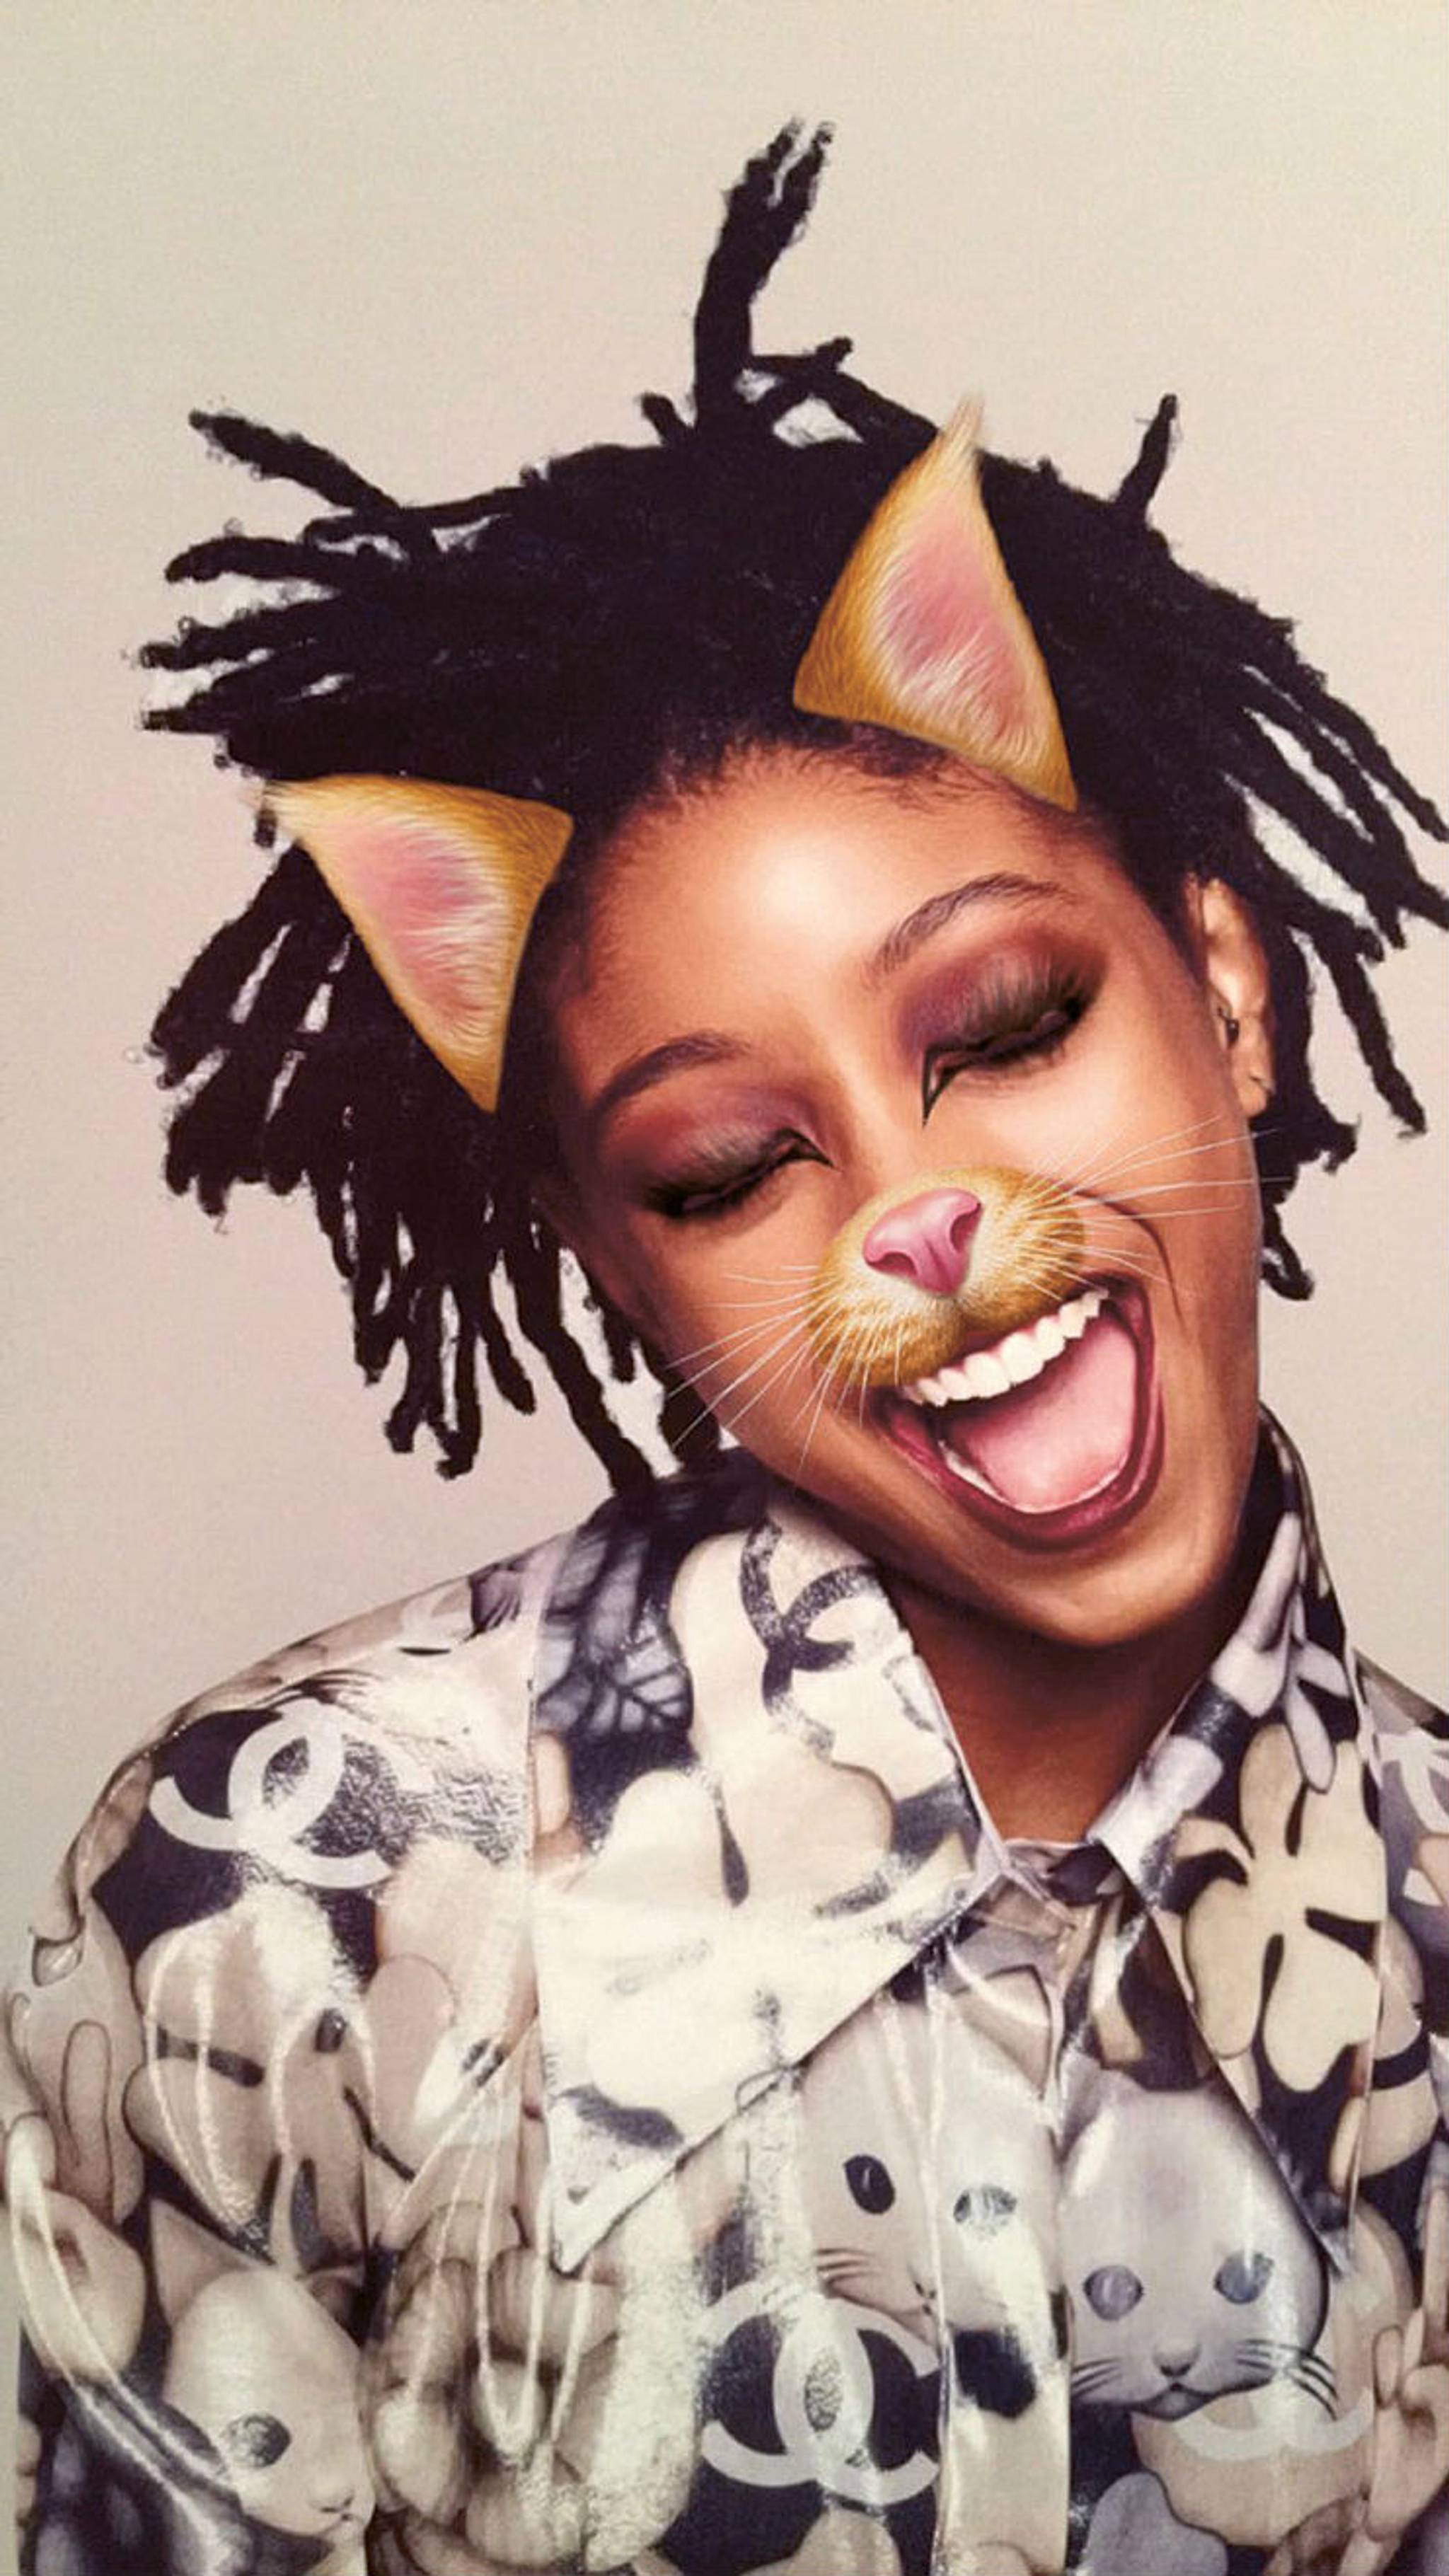 Garage Magazine launches a high-fashion Snapchat filter